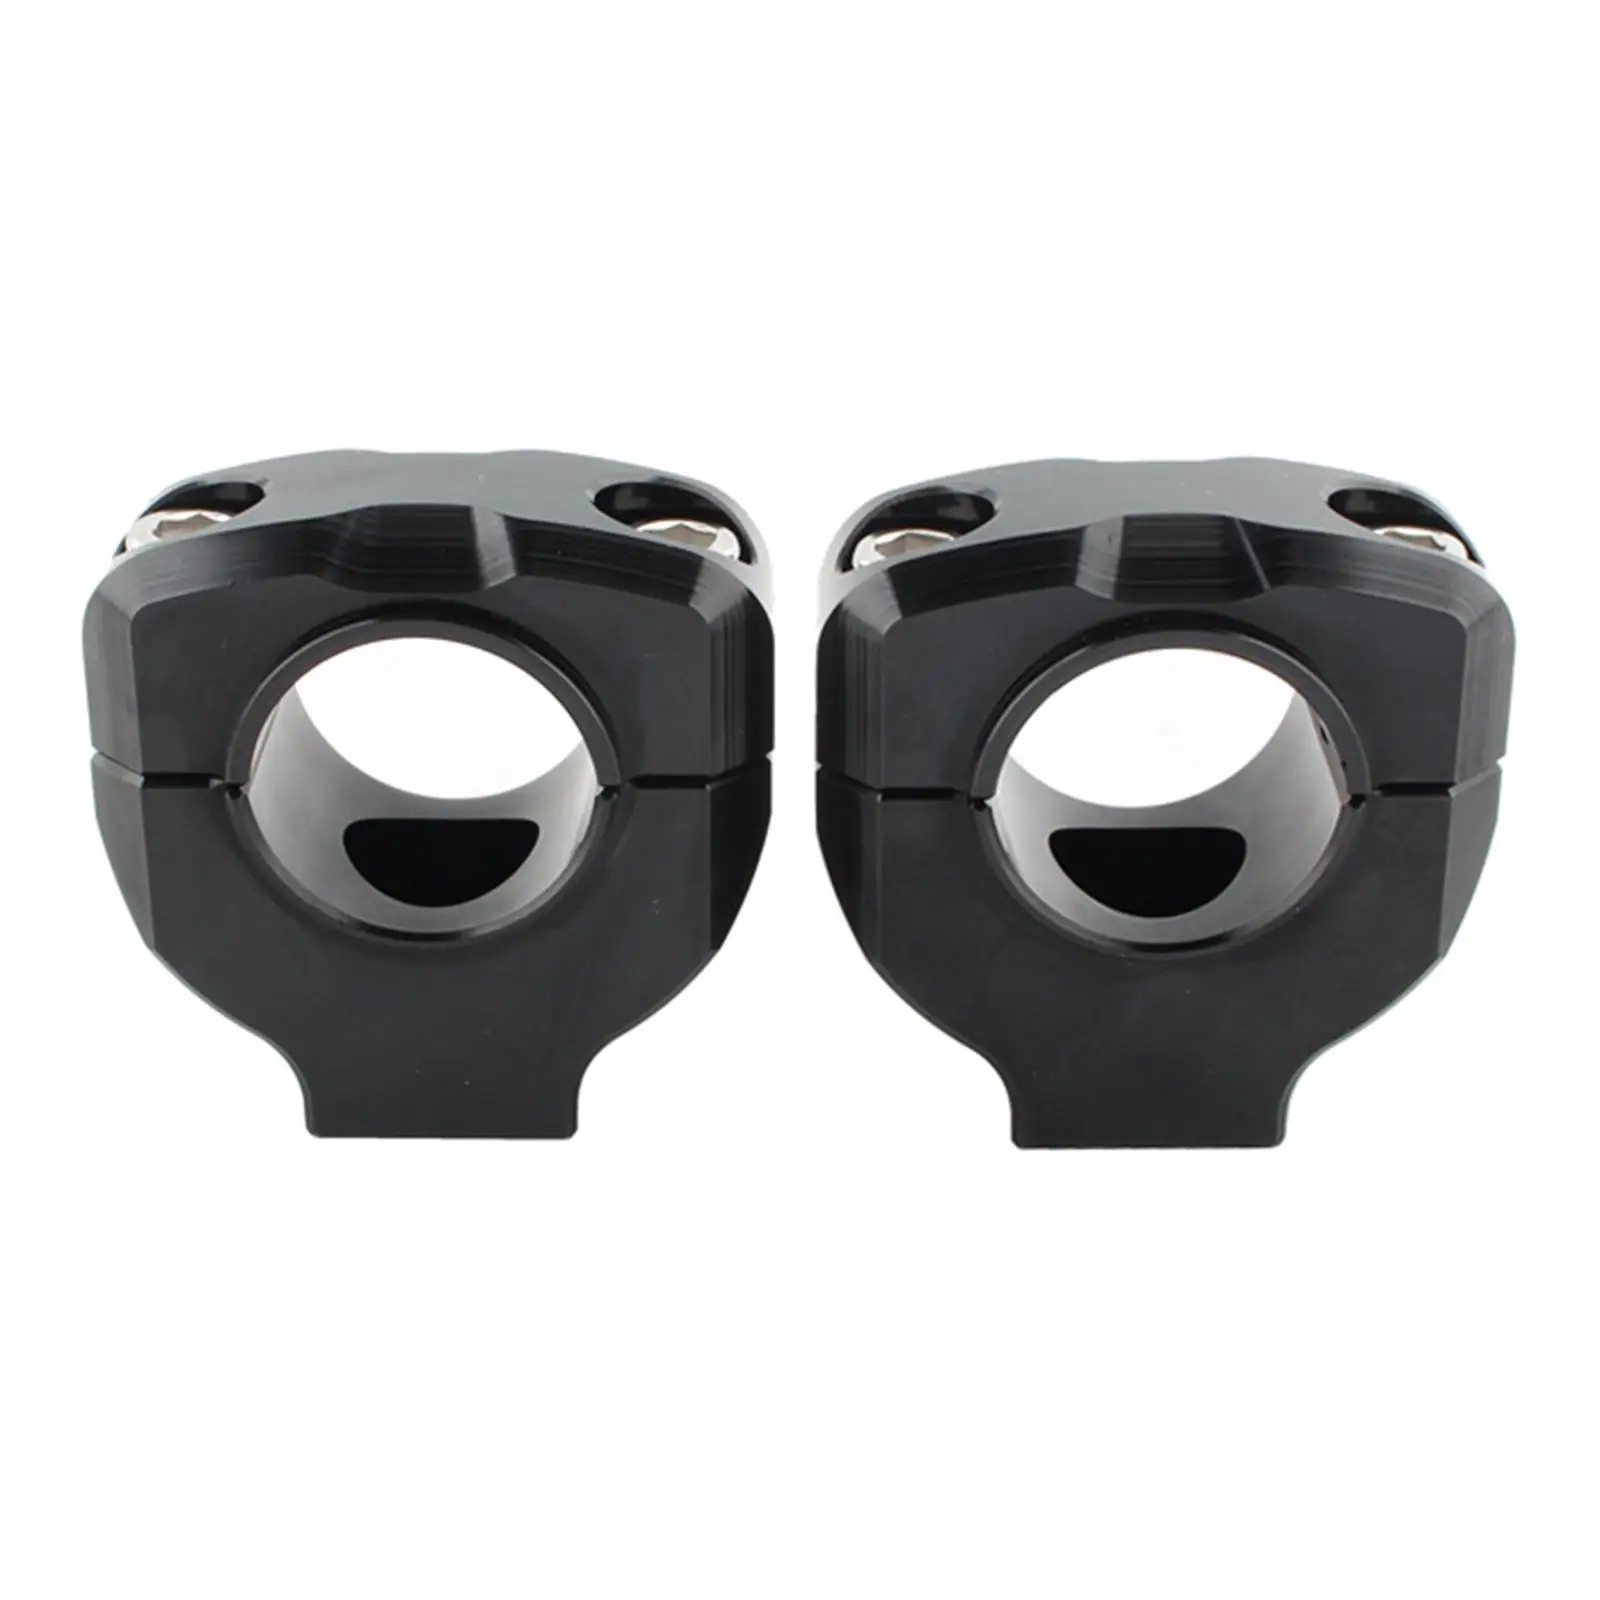 1 pair of universal motorcycle 28mm 1/8 inch handlebar riser clamp   Lifter - £16.84 GBP